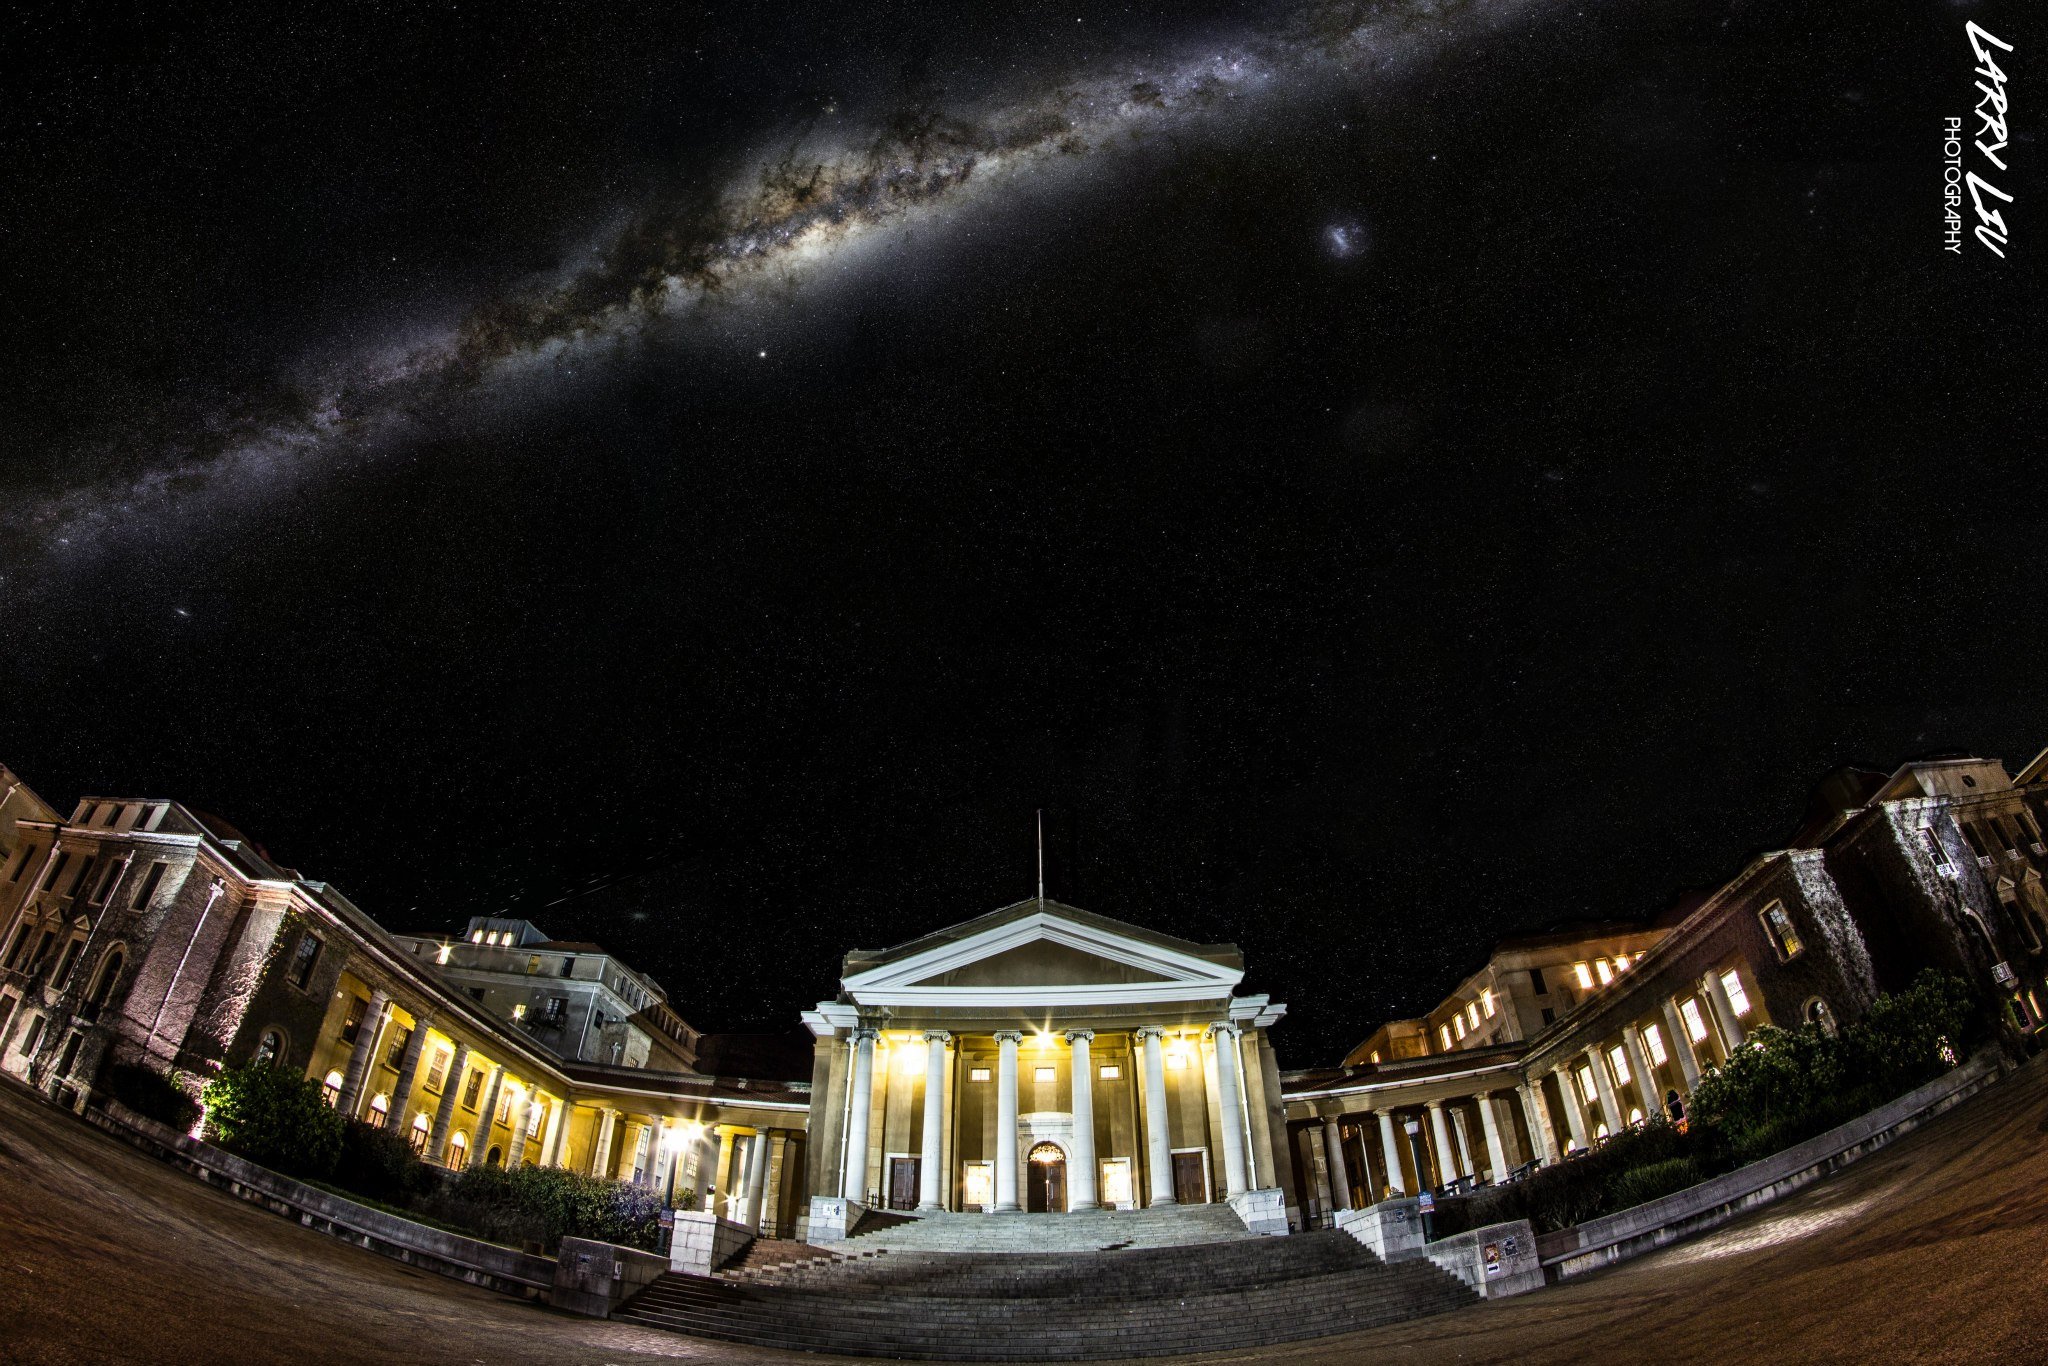 University of Cape Town, Cape Town, South Africa, Fisheye lens, Milky Way, Night Wallpaper